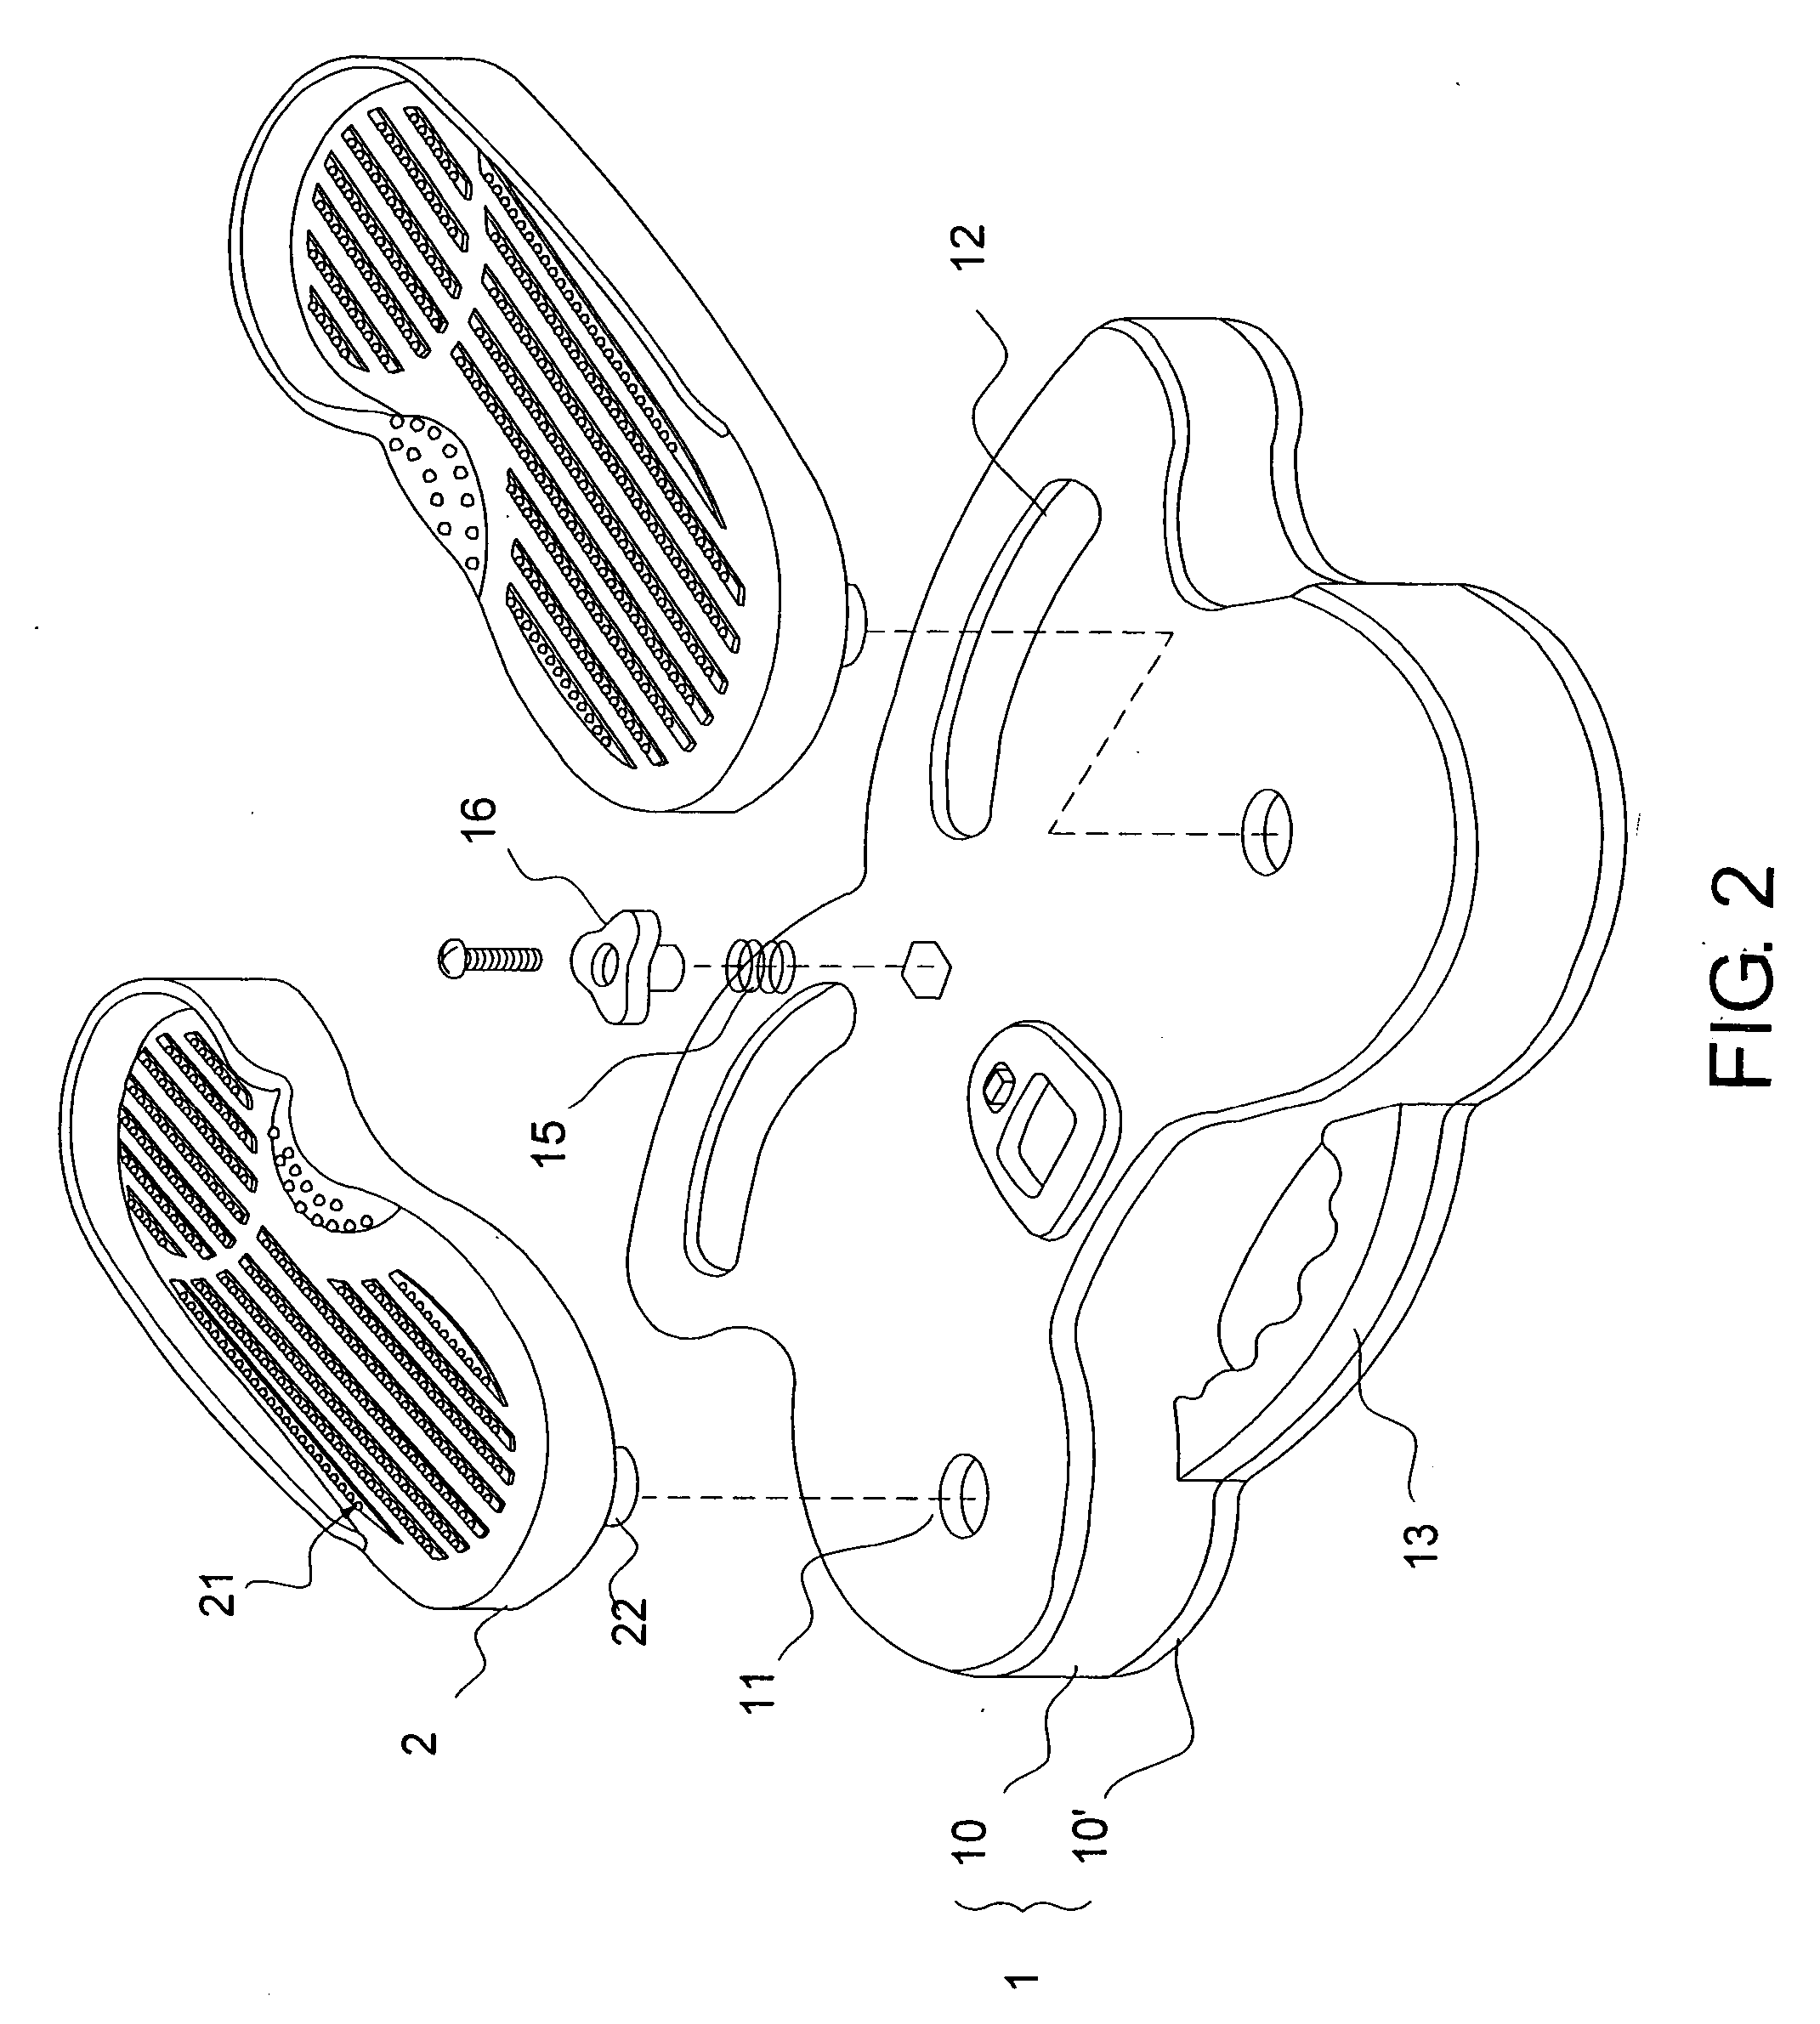 Buttock shaping and training apparatus